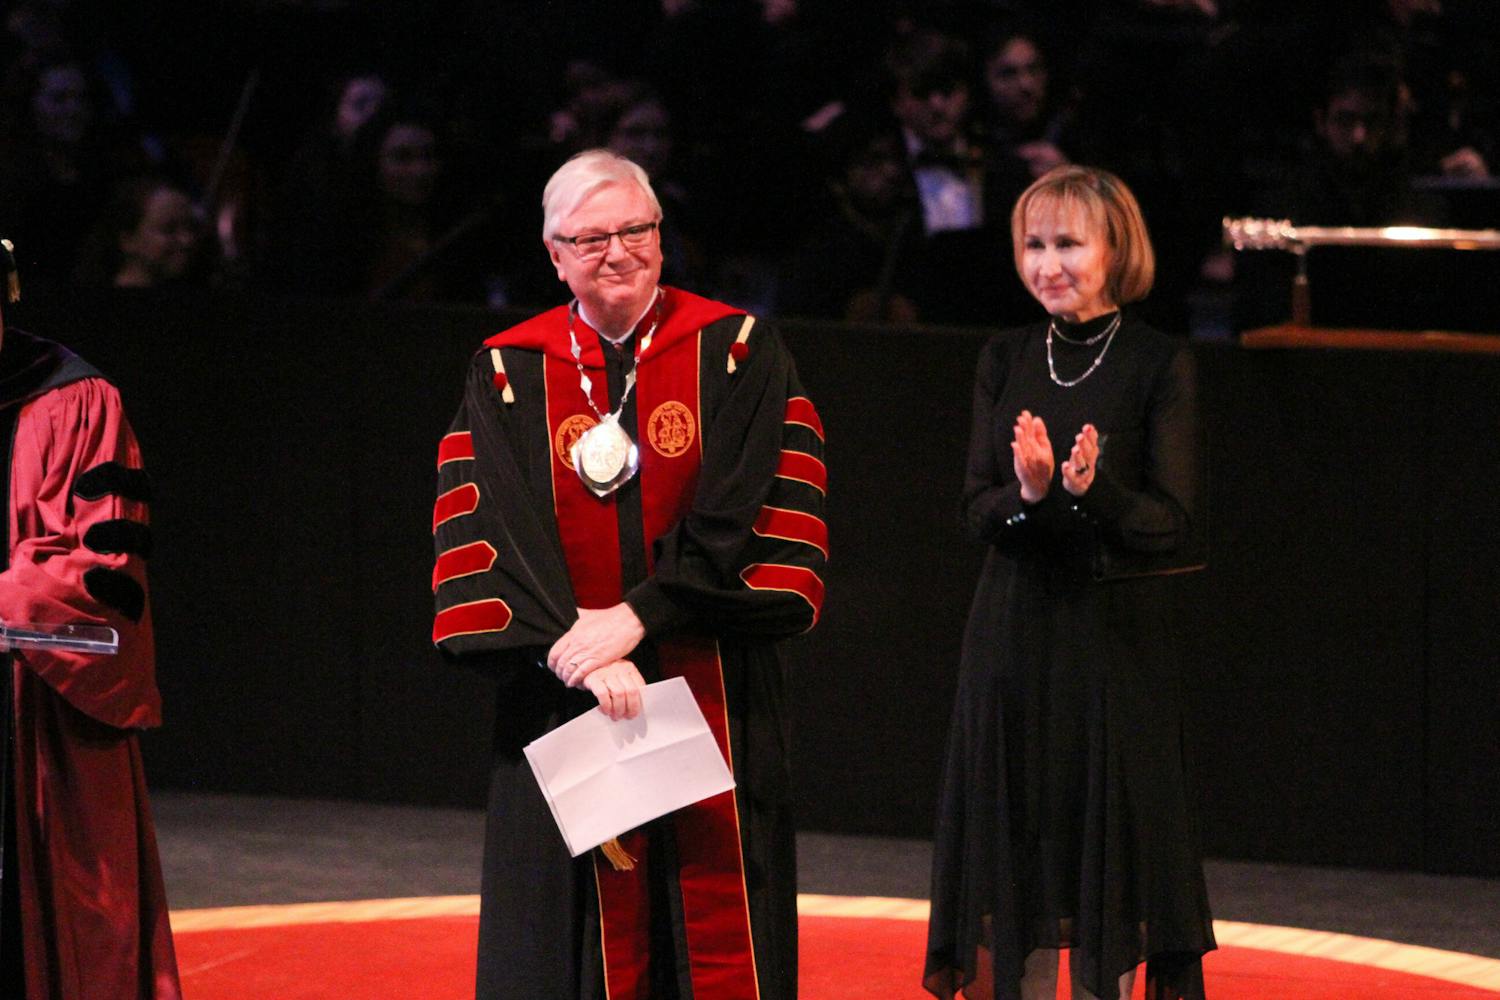 President Michael Amiridis, alongside first lady Ero Aggelopoulou-Amiridis, cast smiles toward those in attendance during the Presidential Investiture Ceremony of Amiridis on Jan. 20, 2023, at the Koger Center for the Arts. Amiridis was invested as the University of South Carolina’s 30th president.